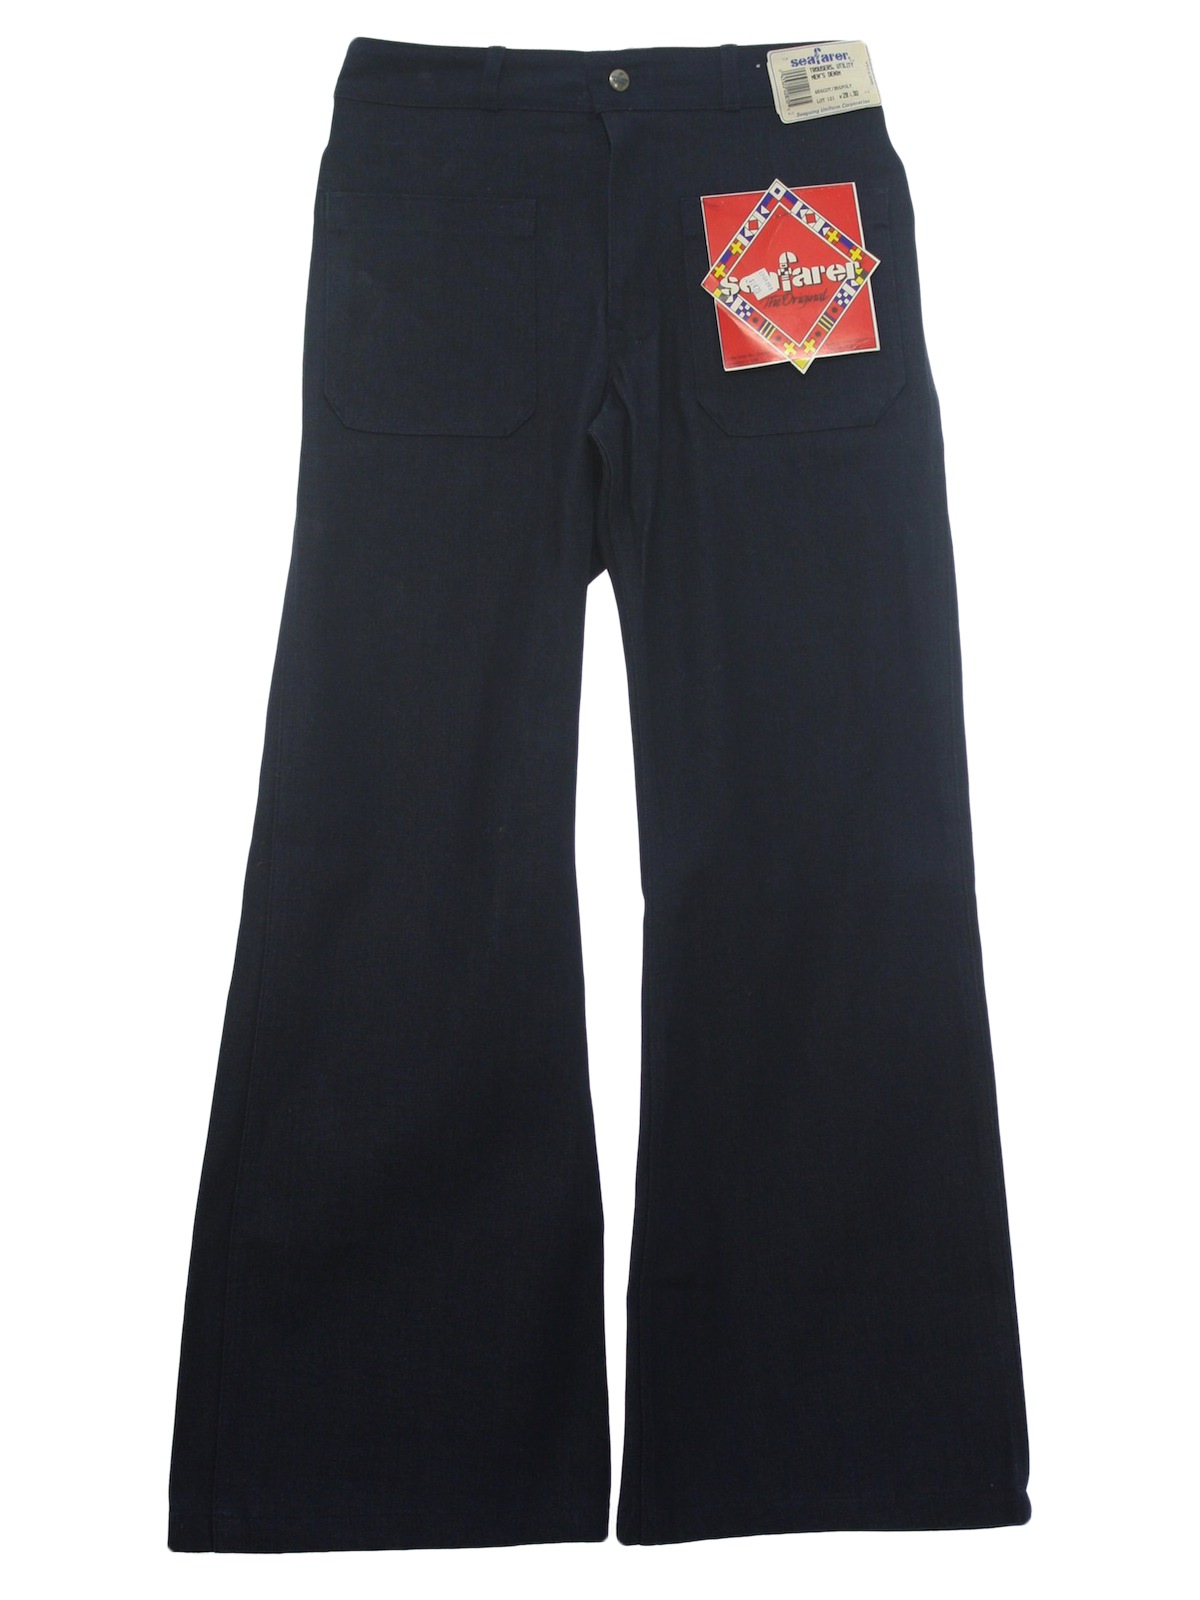 Retro 70's Bellbottom Pants: 70s style -Seafarer- Unisex (made for